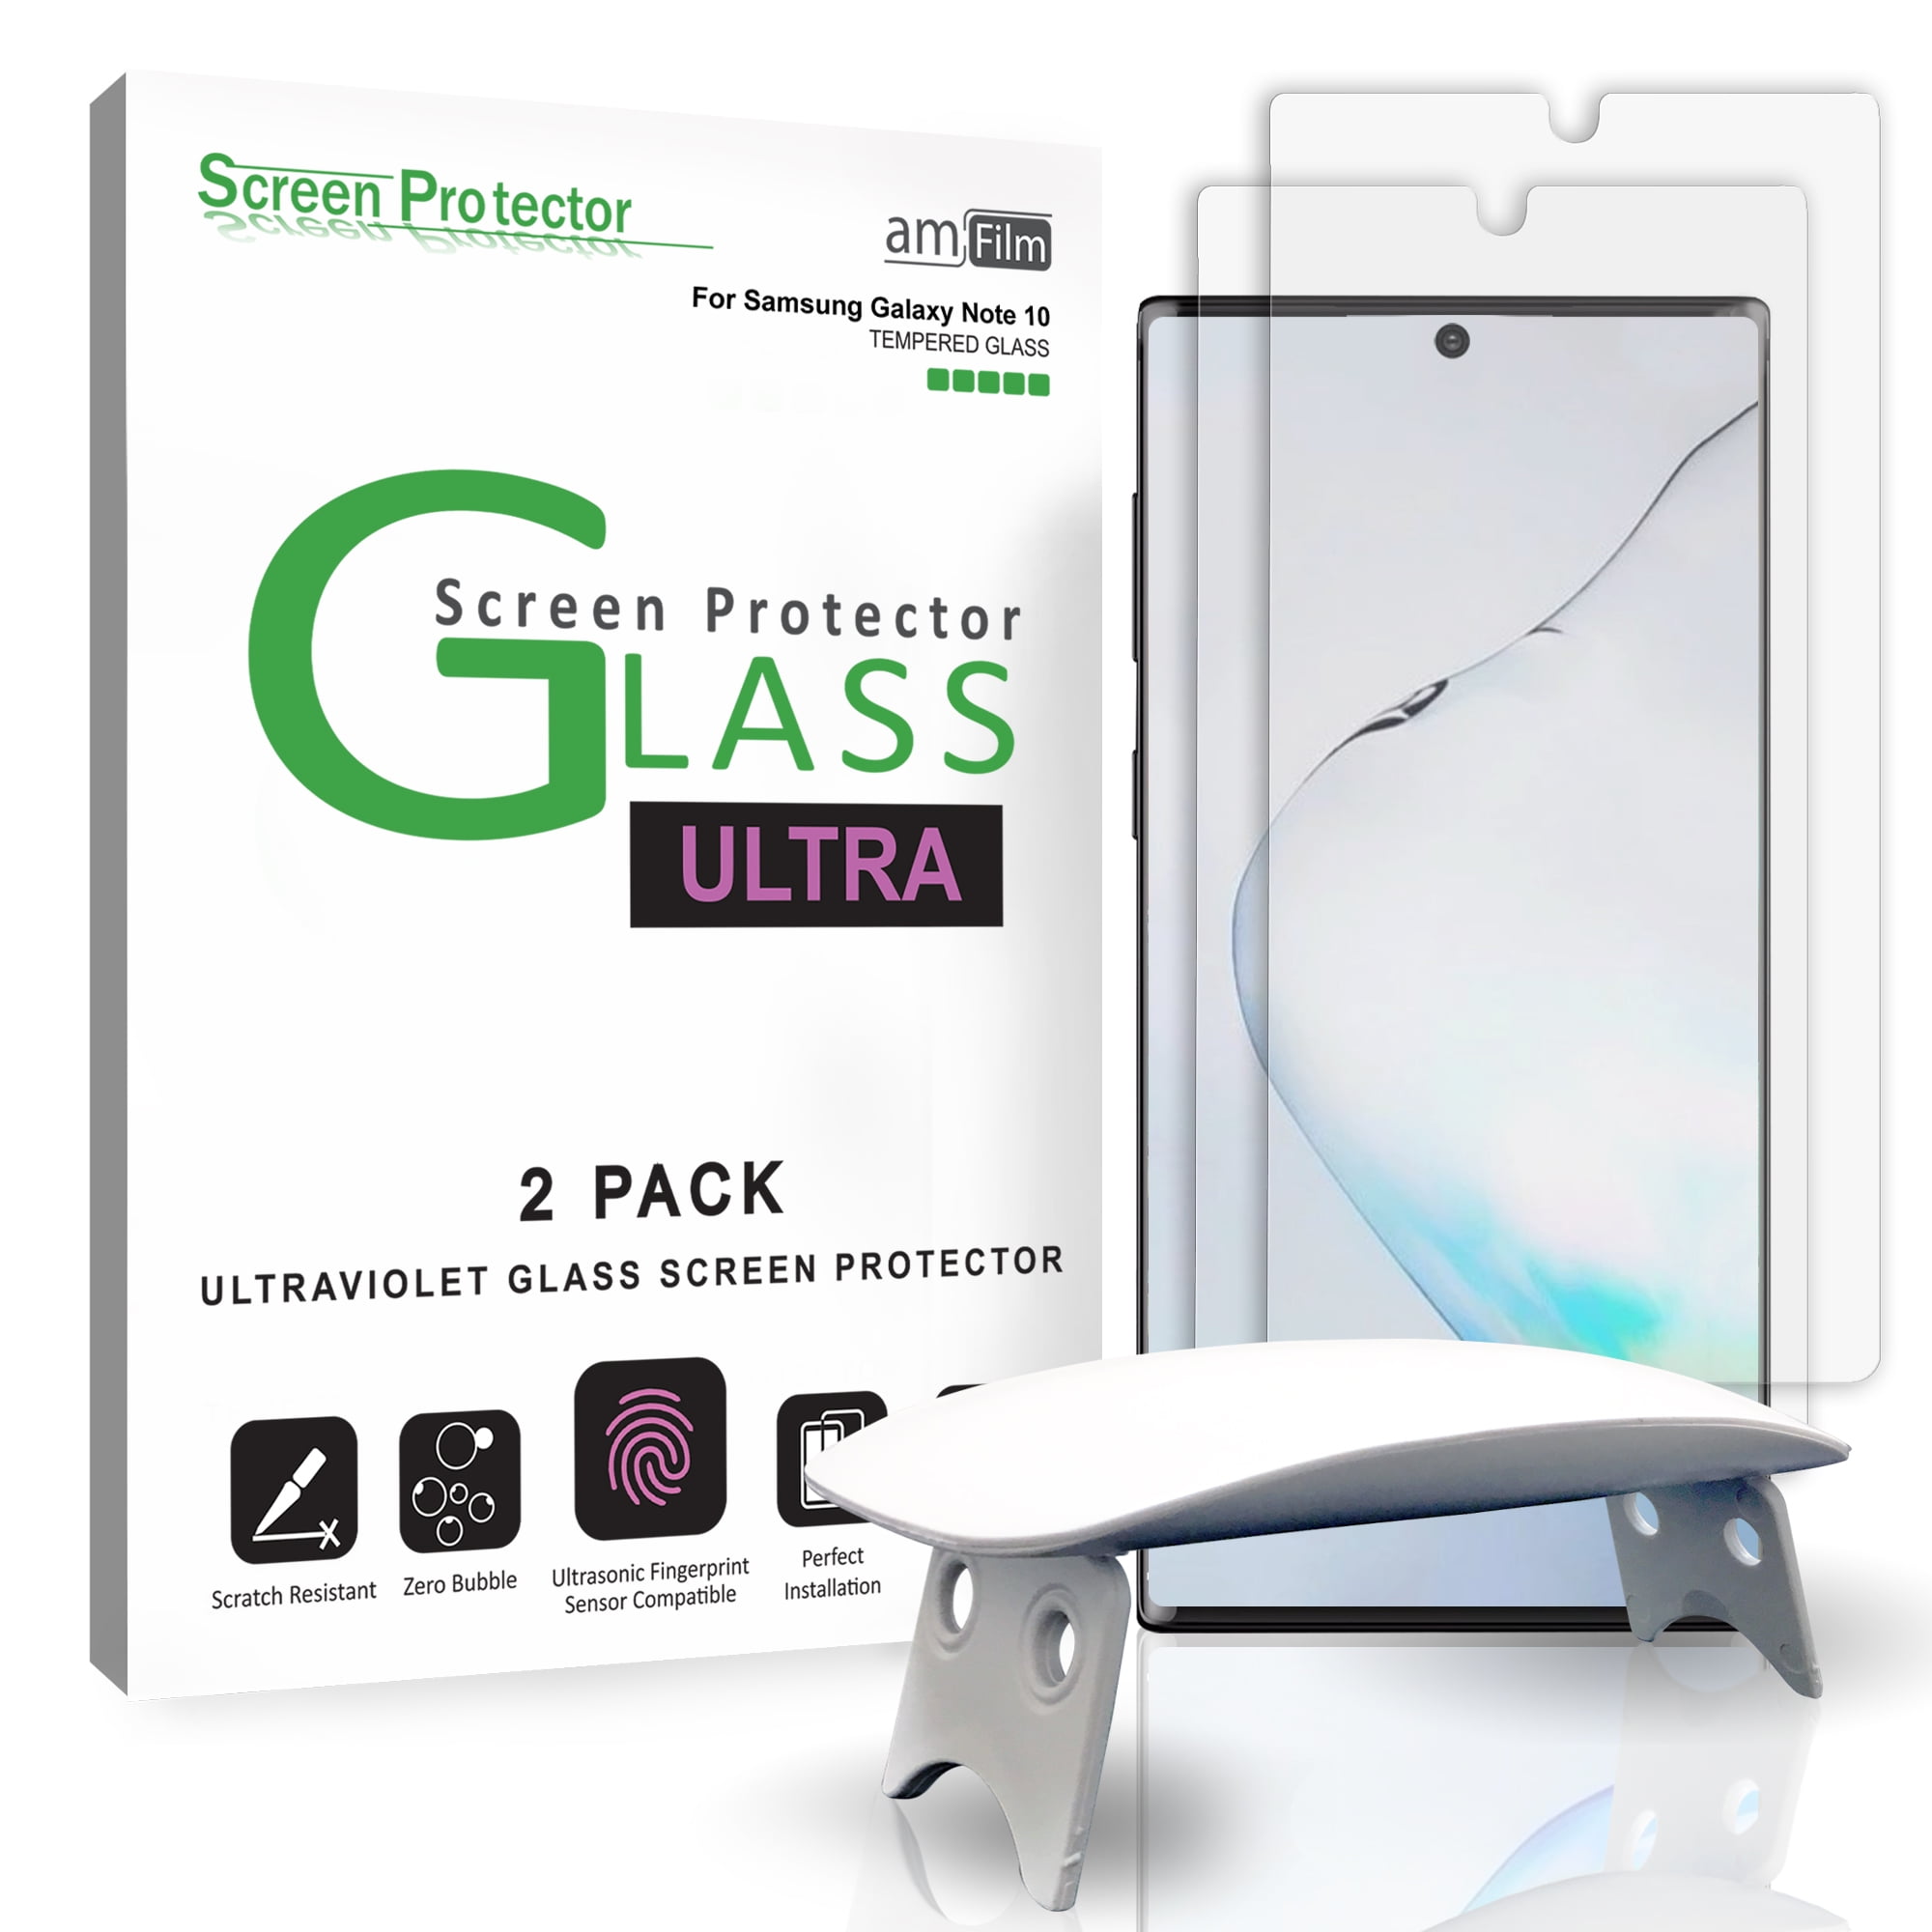 Display Protection Film 100% fits Protective Film Savvies Crystalclear Screen Protector for MINOX DCC 5.1